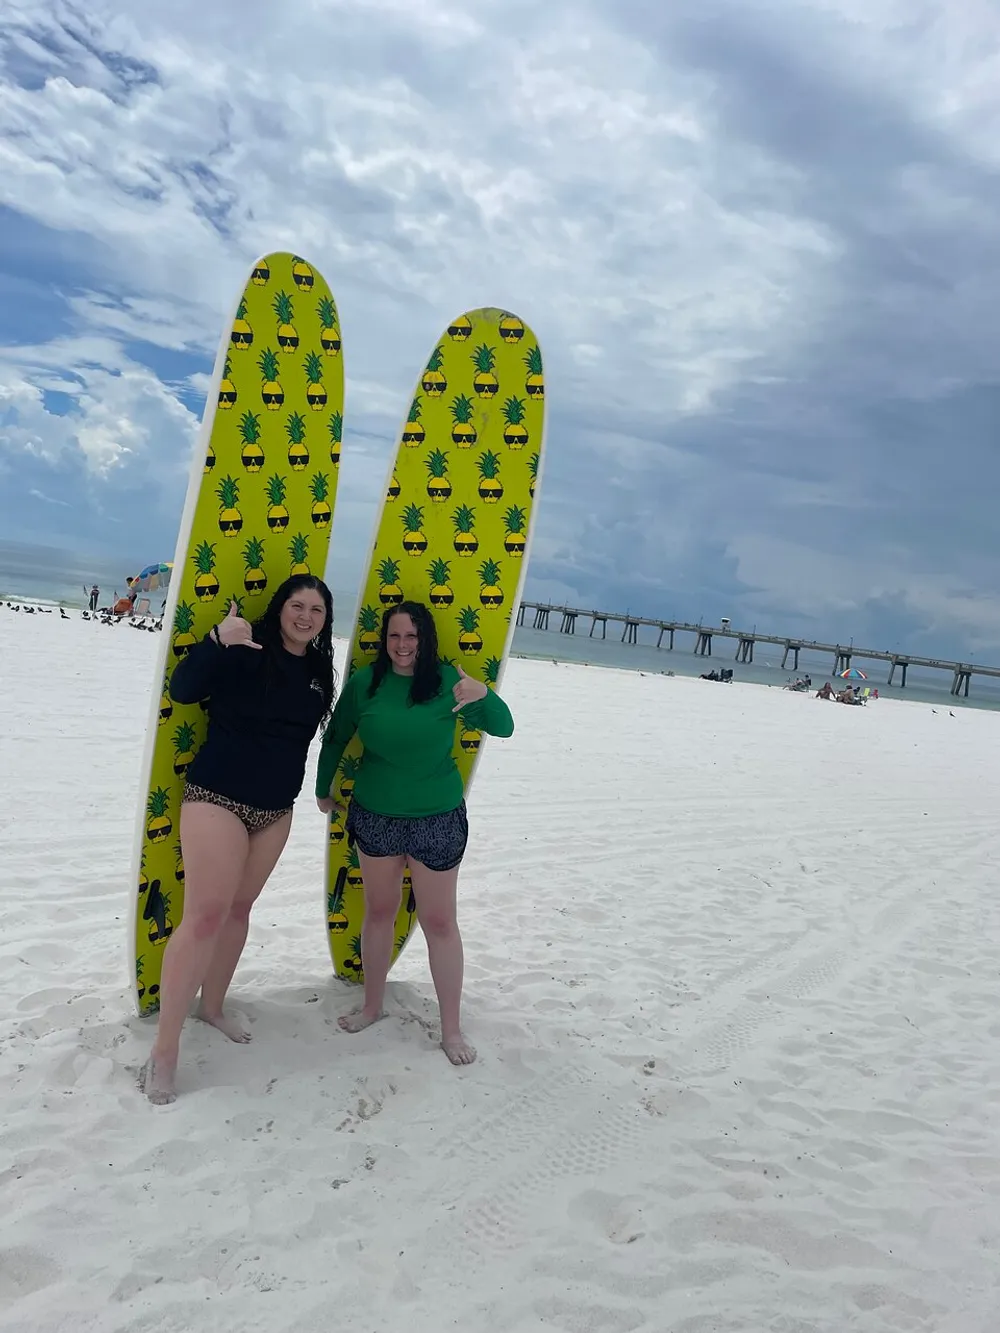 Two people are standing on a sandy beach holding bright yellow surfboards with pineapple patterns smiling for the camera